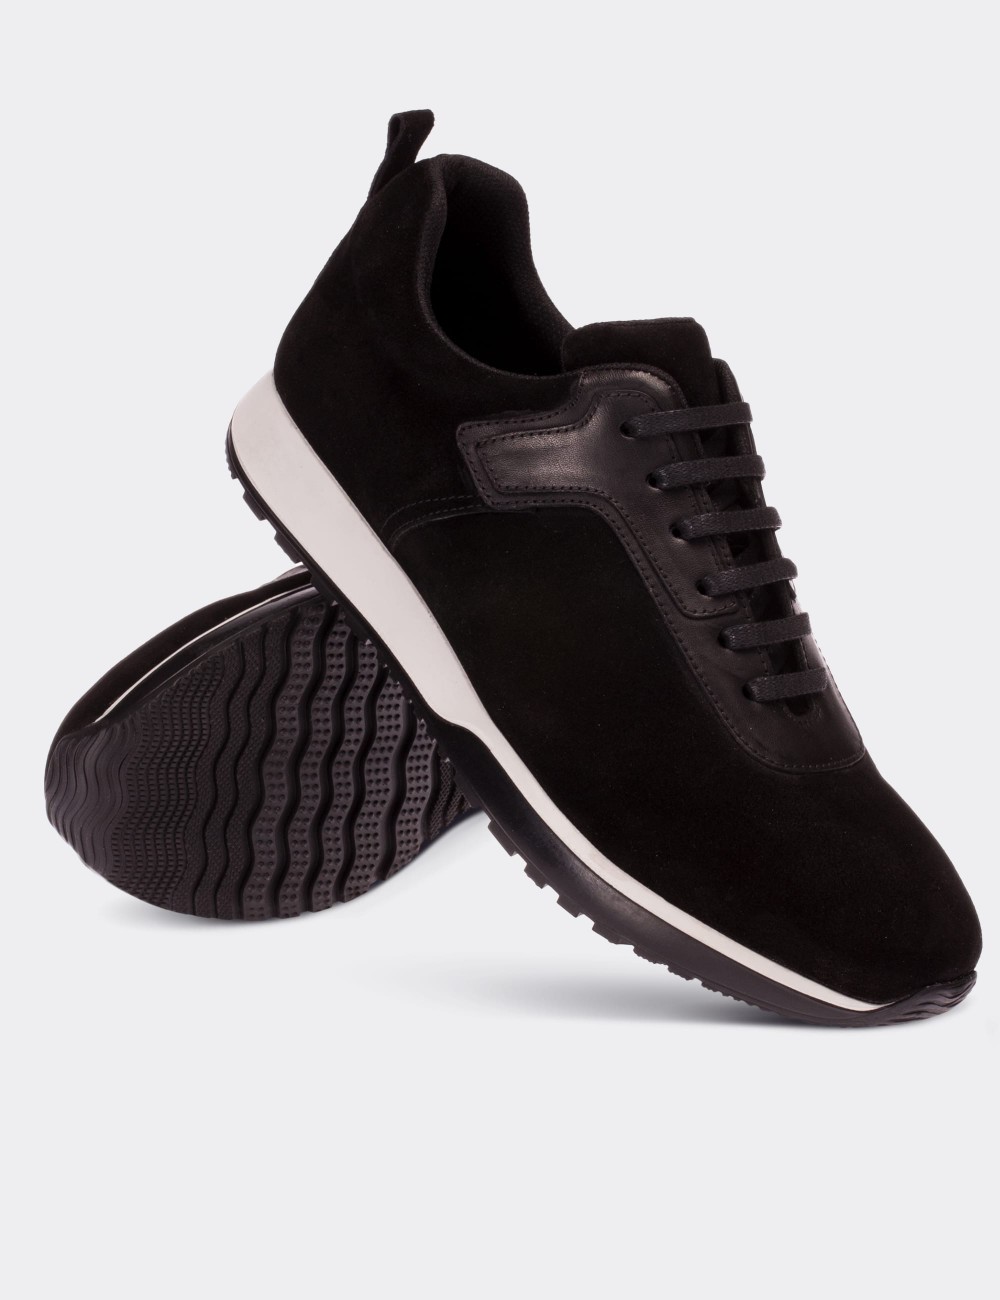 Black Suede Leather Sneakers - 01730MSYHT01